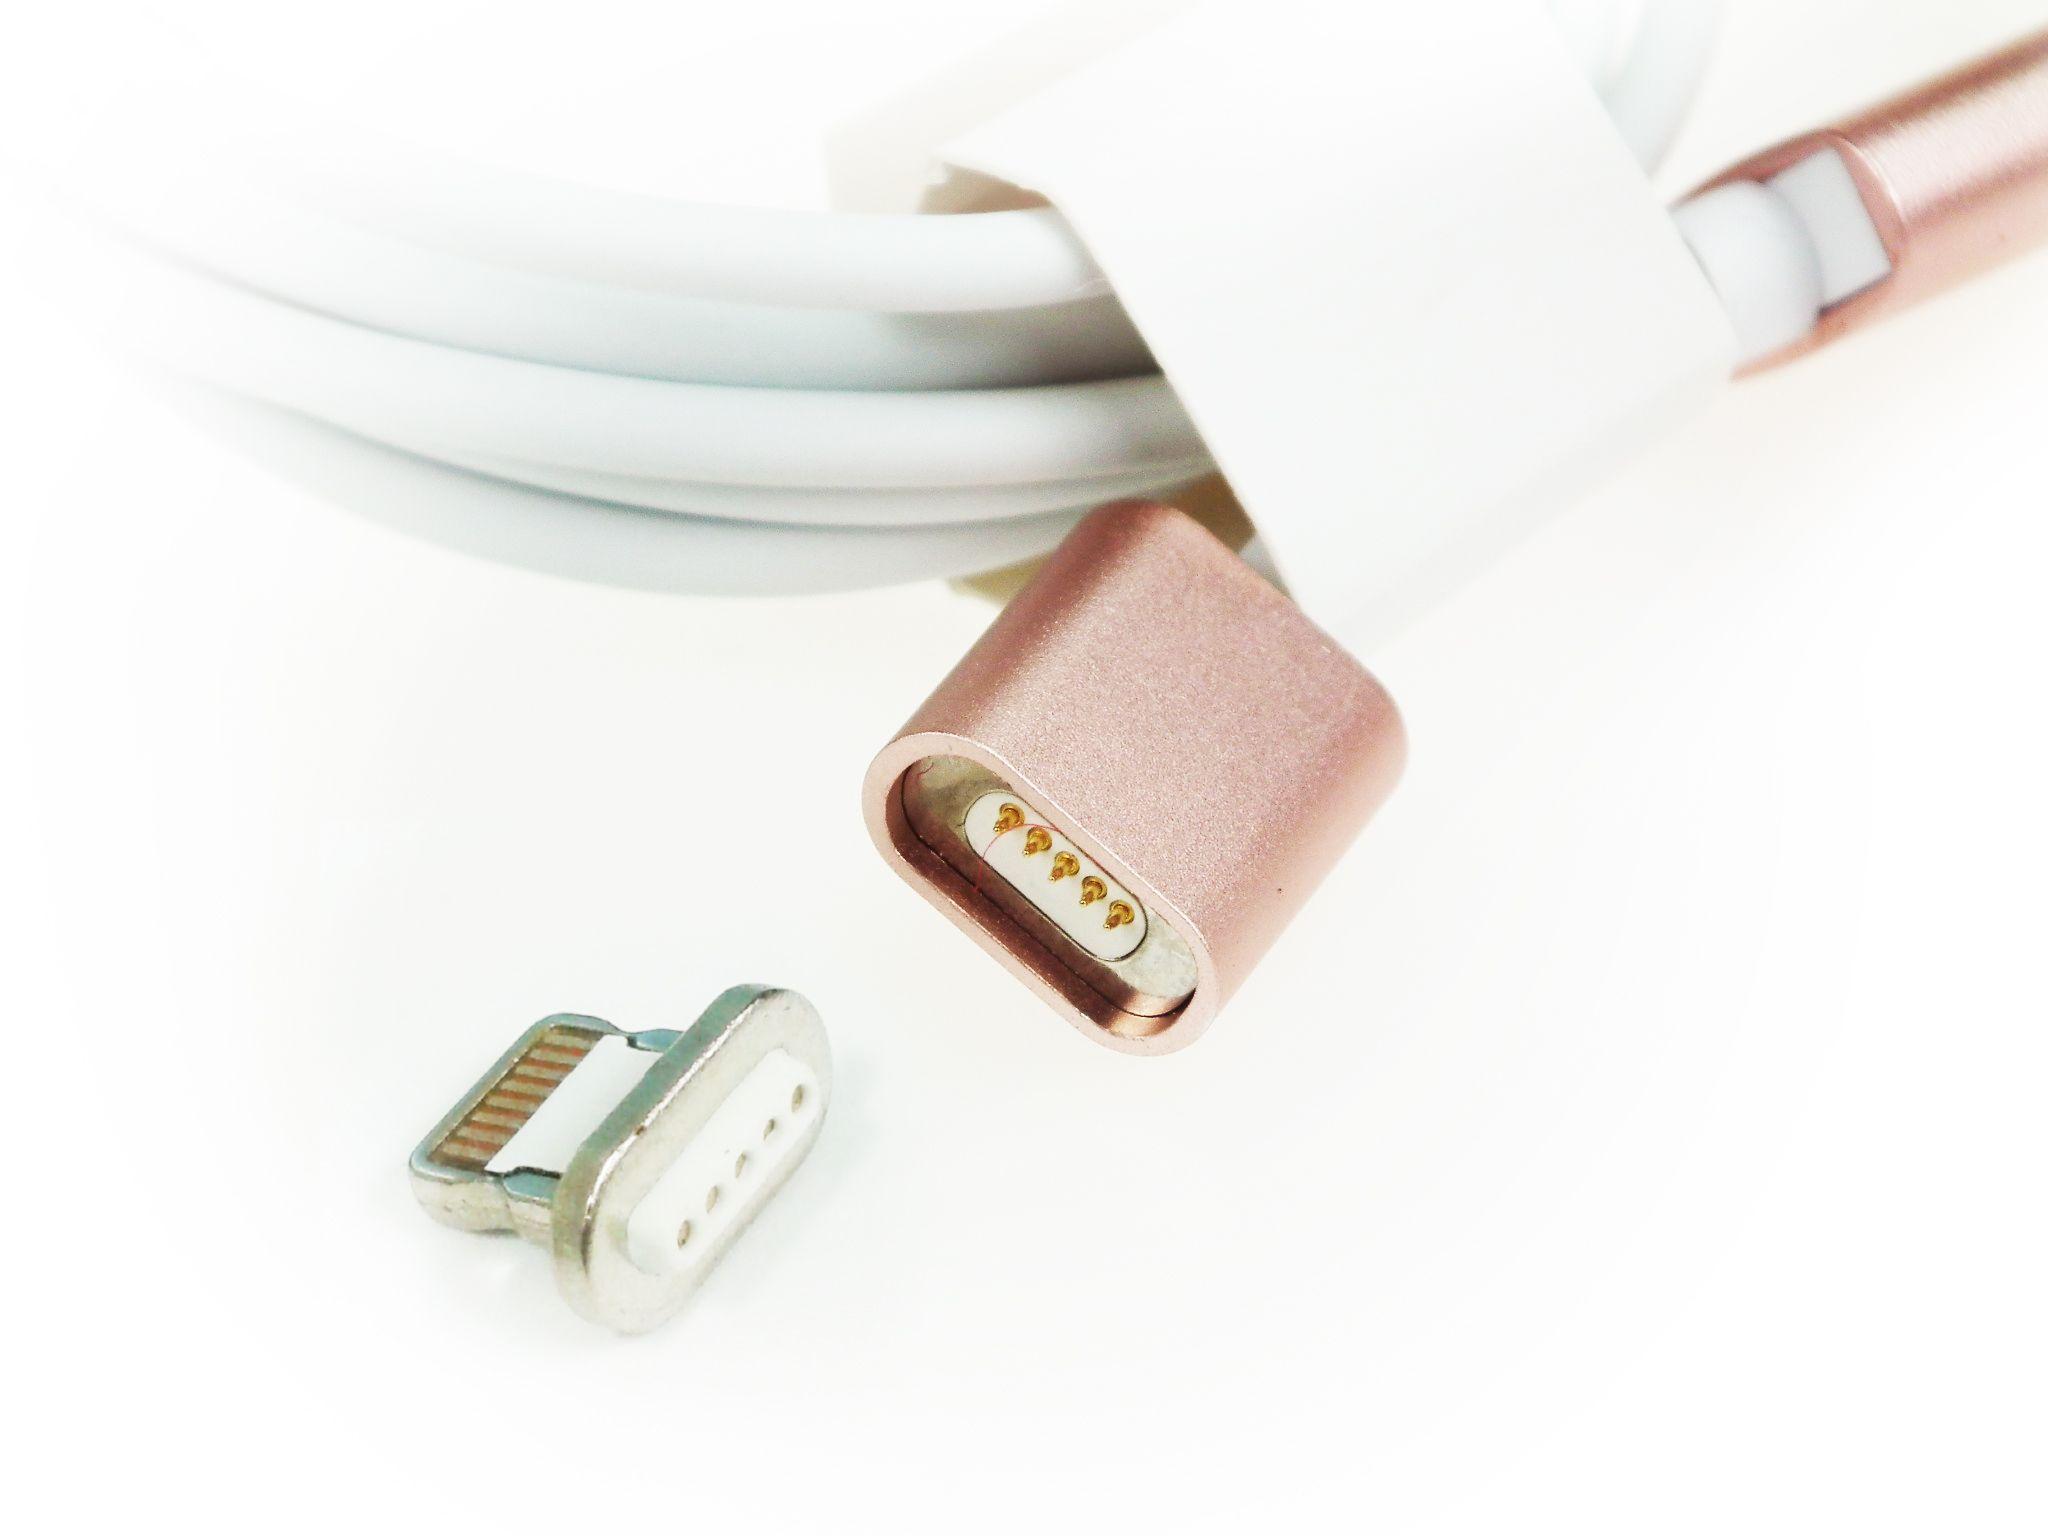 MAGNETIC CABLE  iPhone 5/6/7 PINK